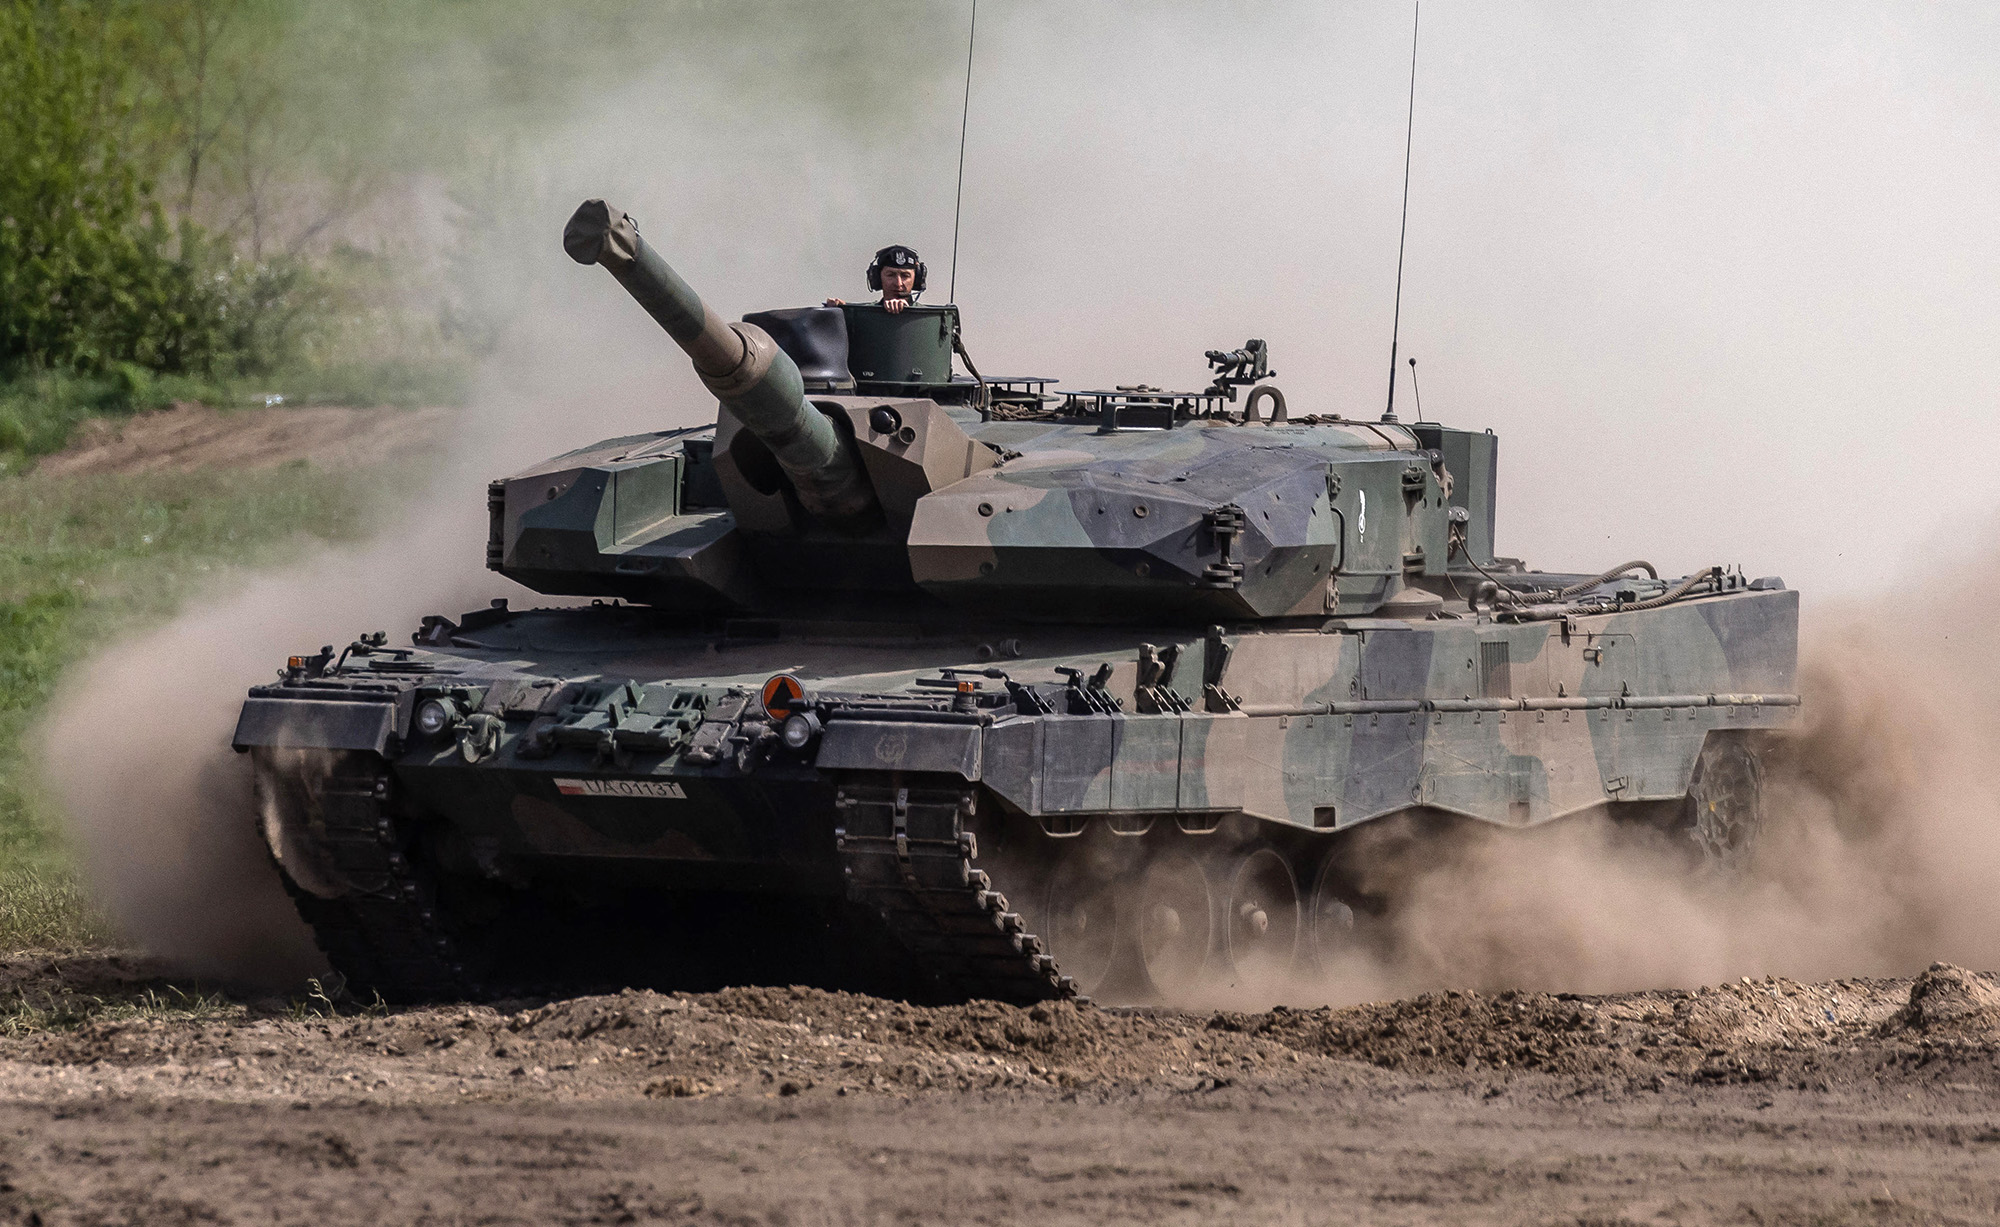 17) German defense ministry says it has 320 Leopard 2 tanks in its 